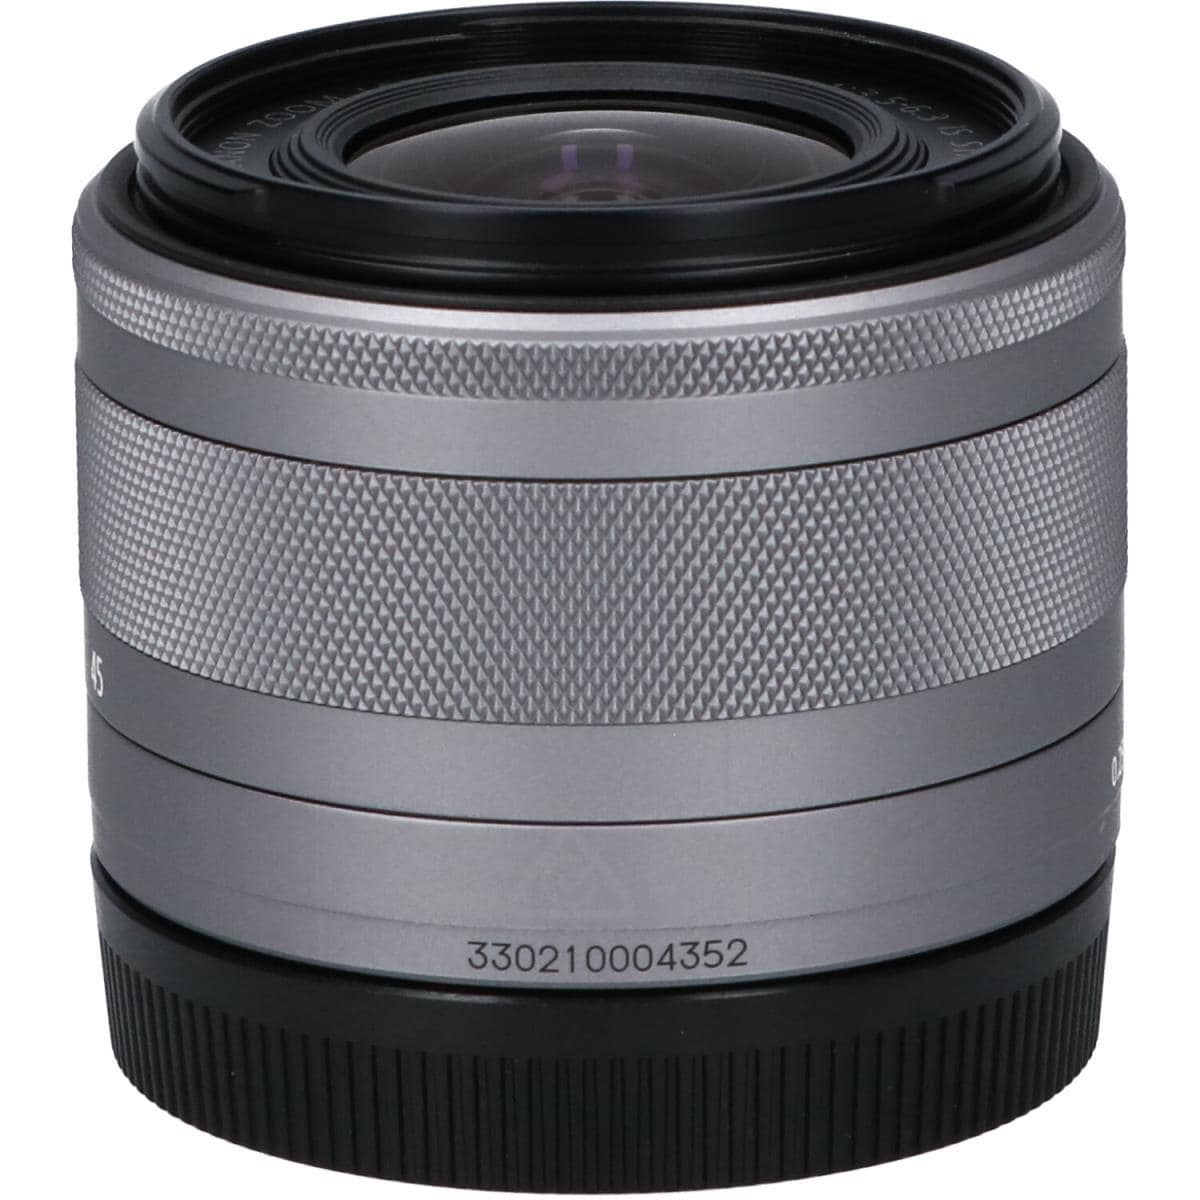 CANON EF-M15-45mm F3.5-6.3IS STM